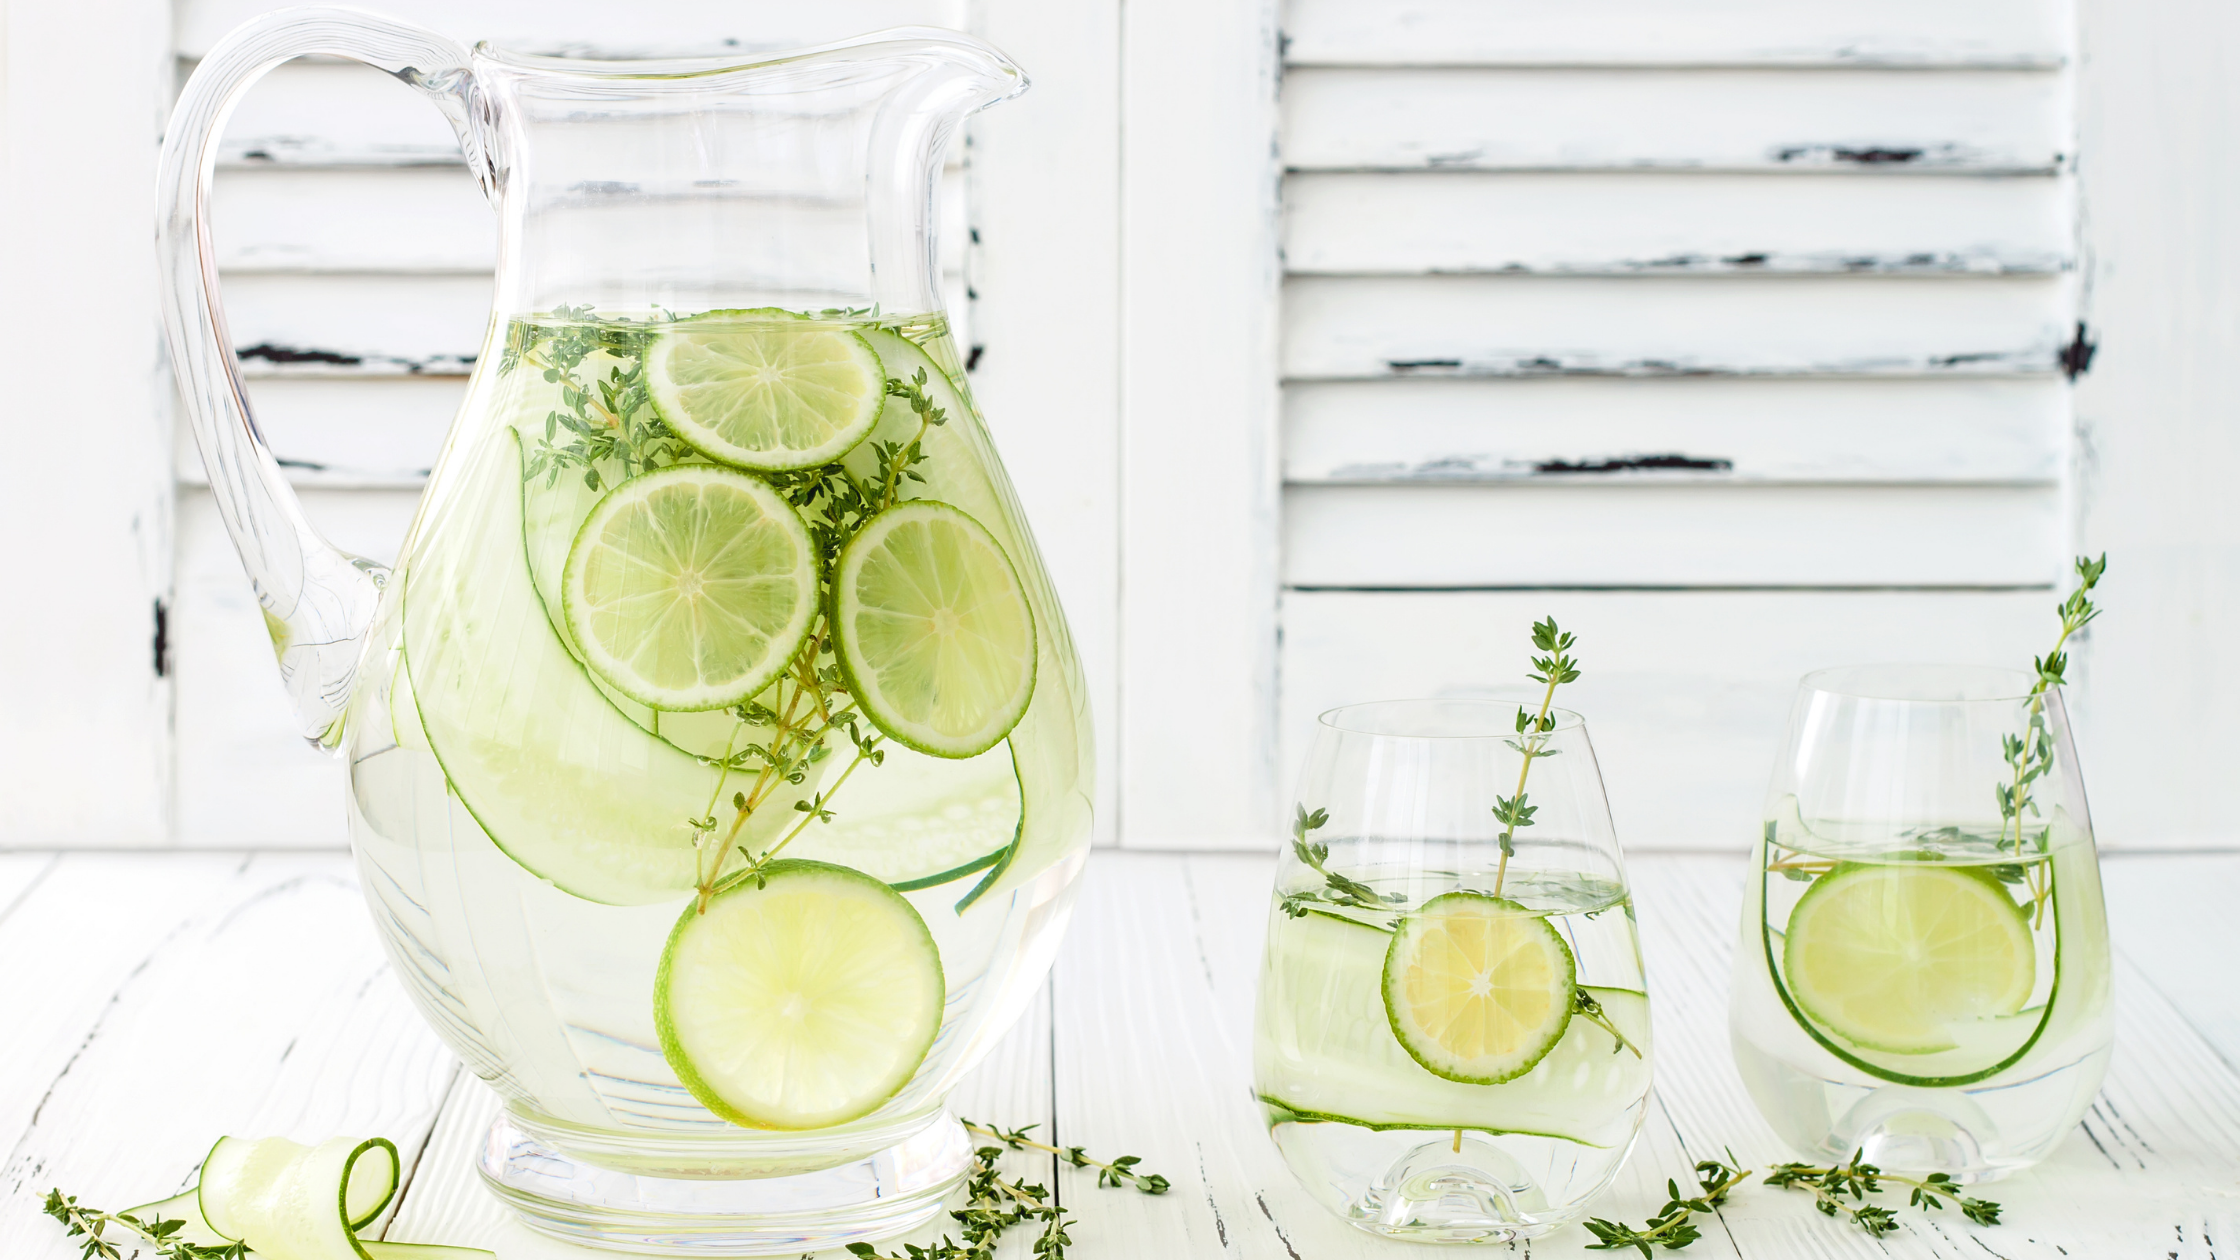 Glass pitcher of water with lime slices, sprig of thyme on a white wooden table